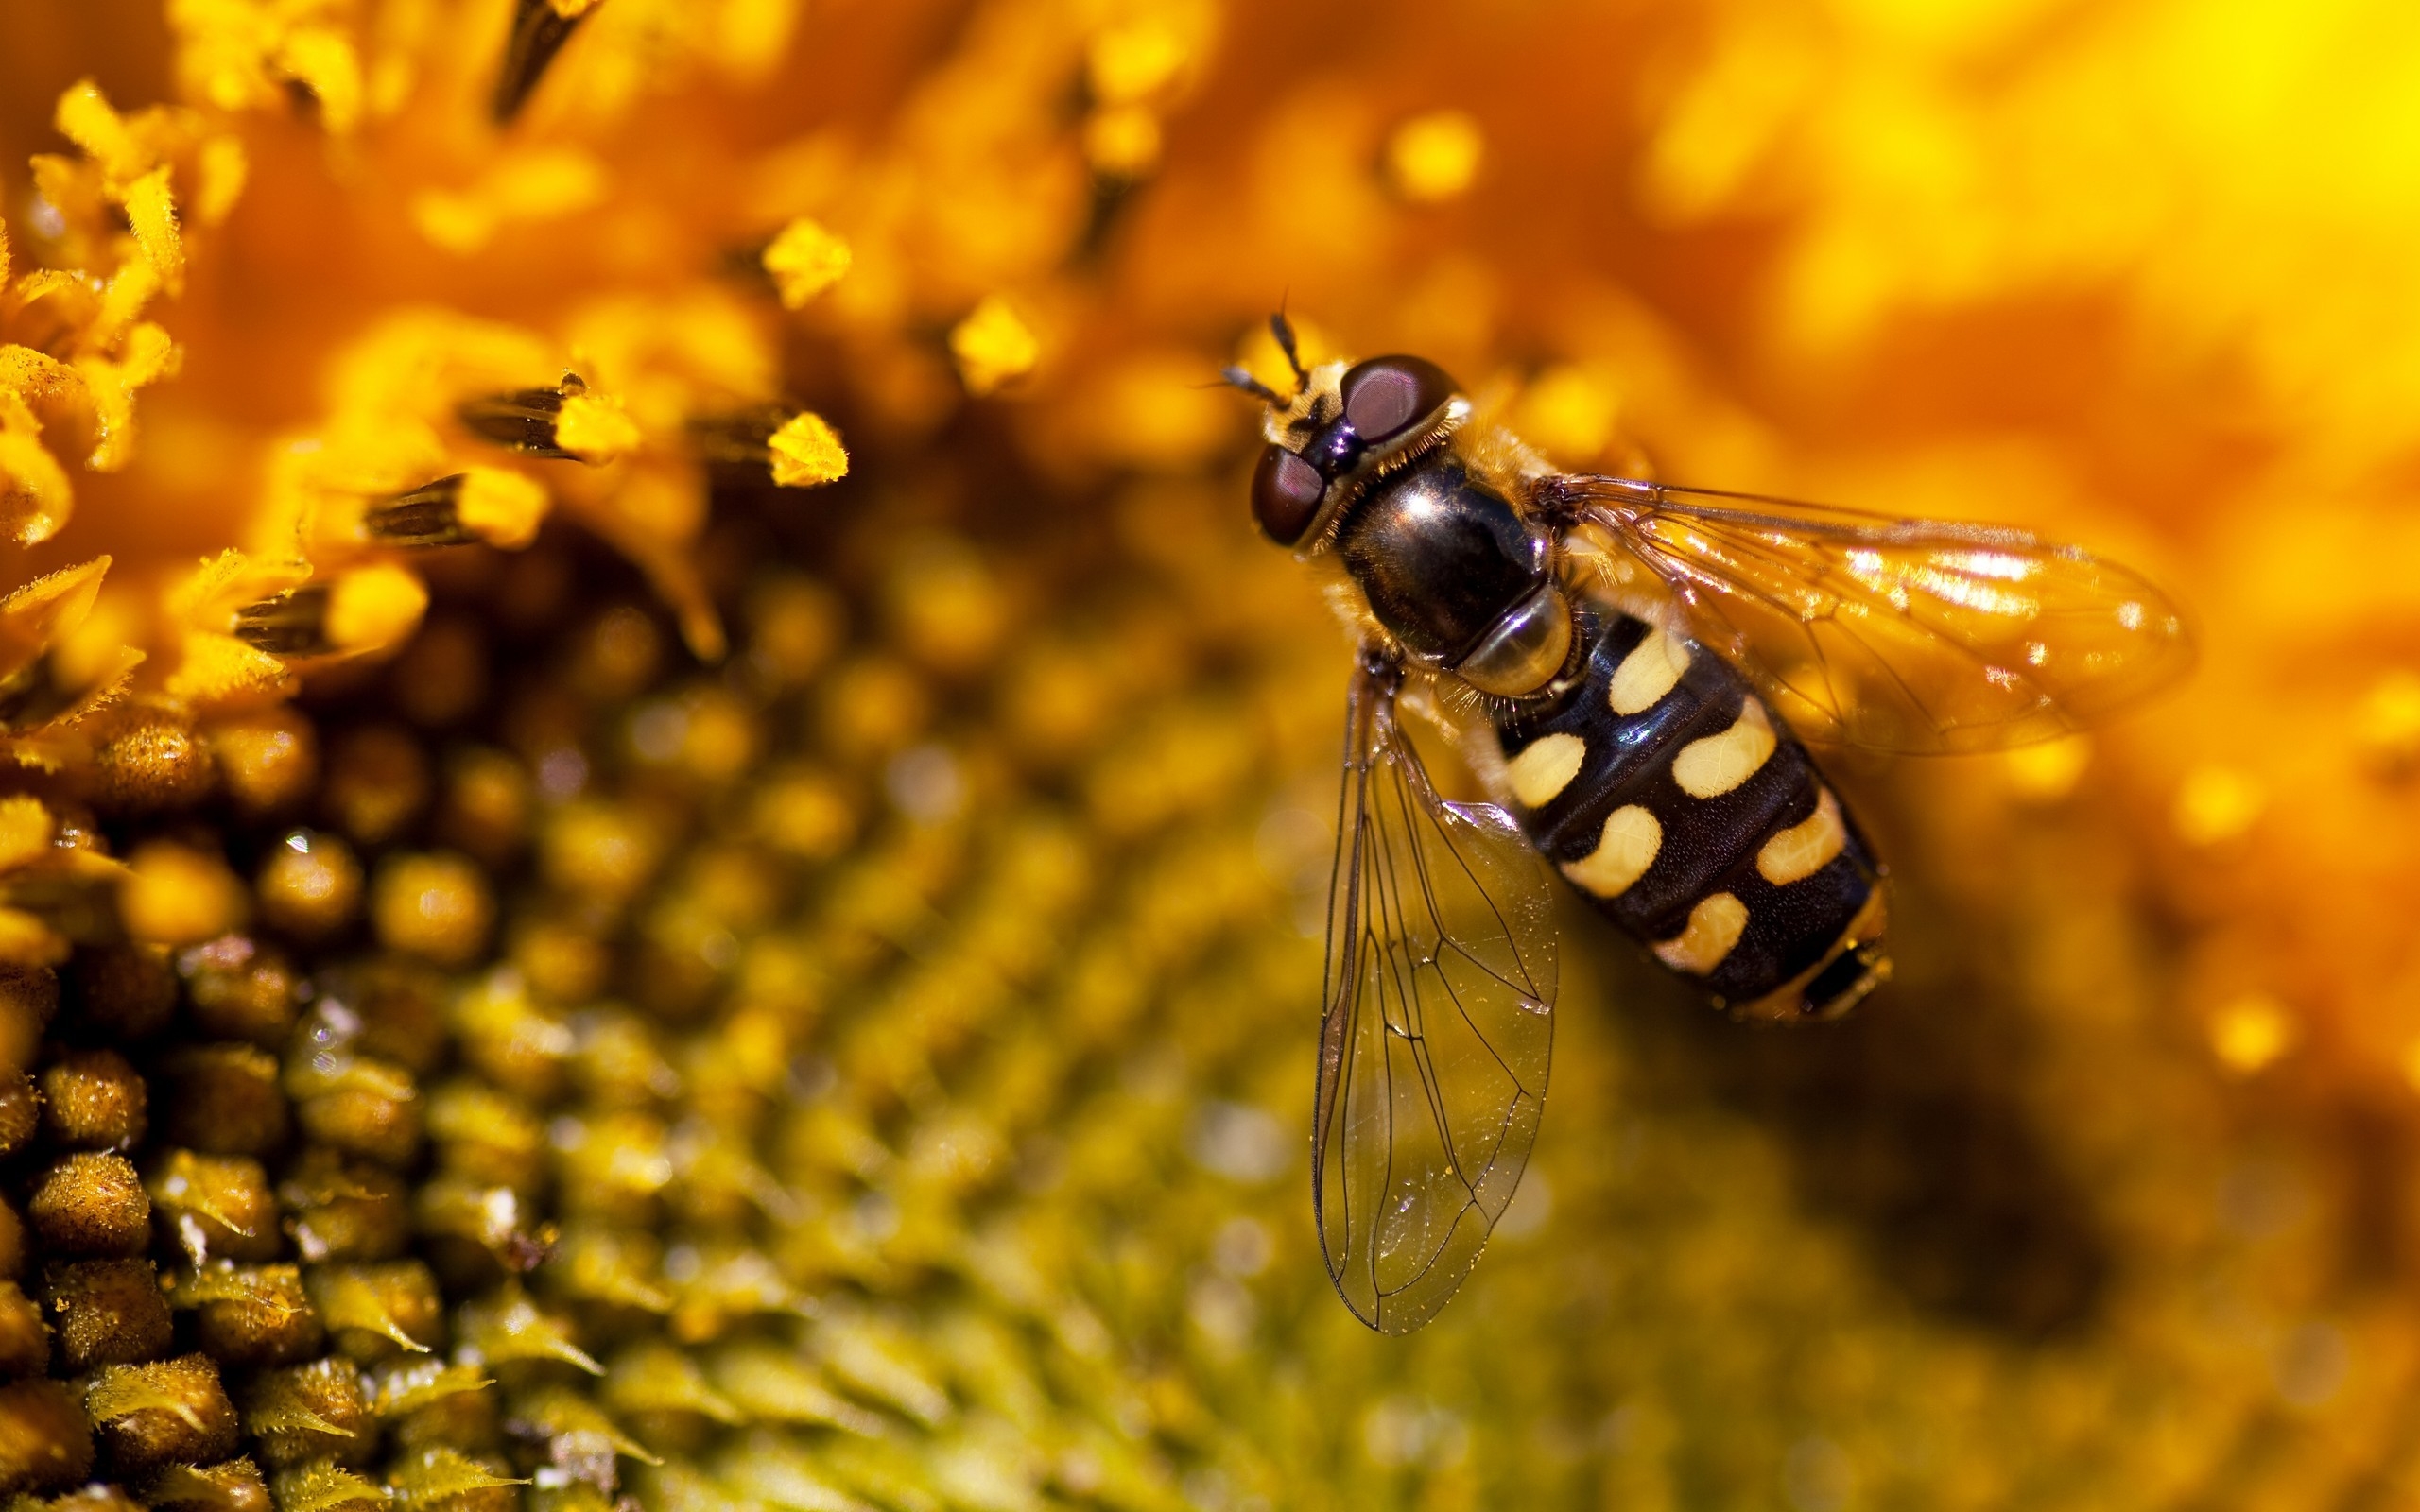 flowers, Insects, Macro, Bees, Sunflowers Wallpaper